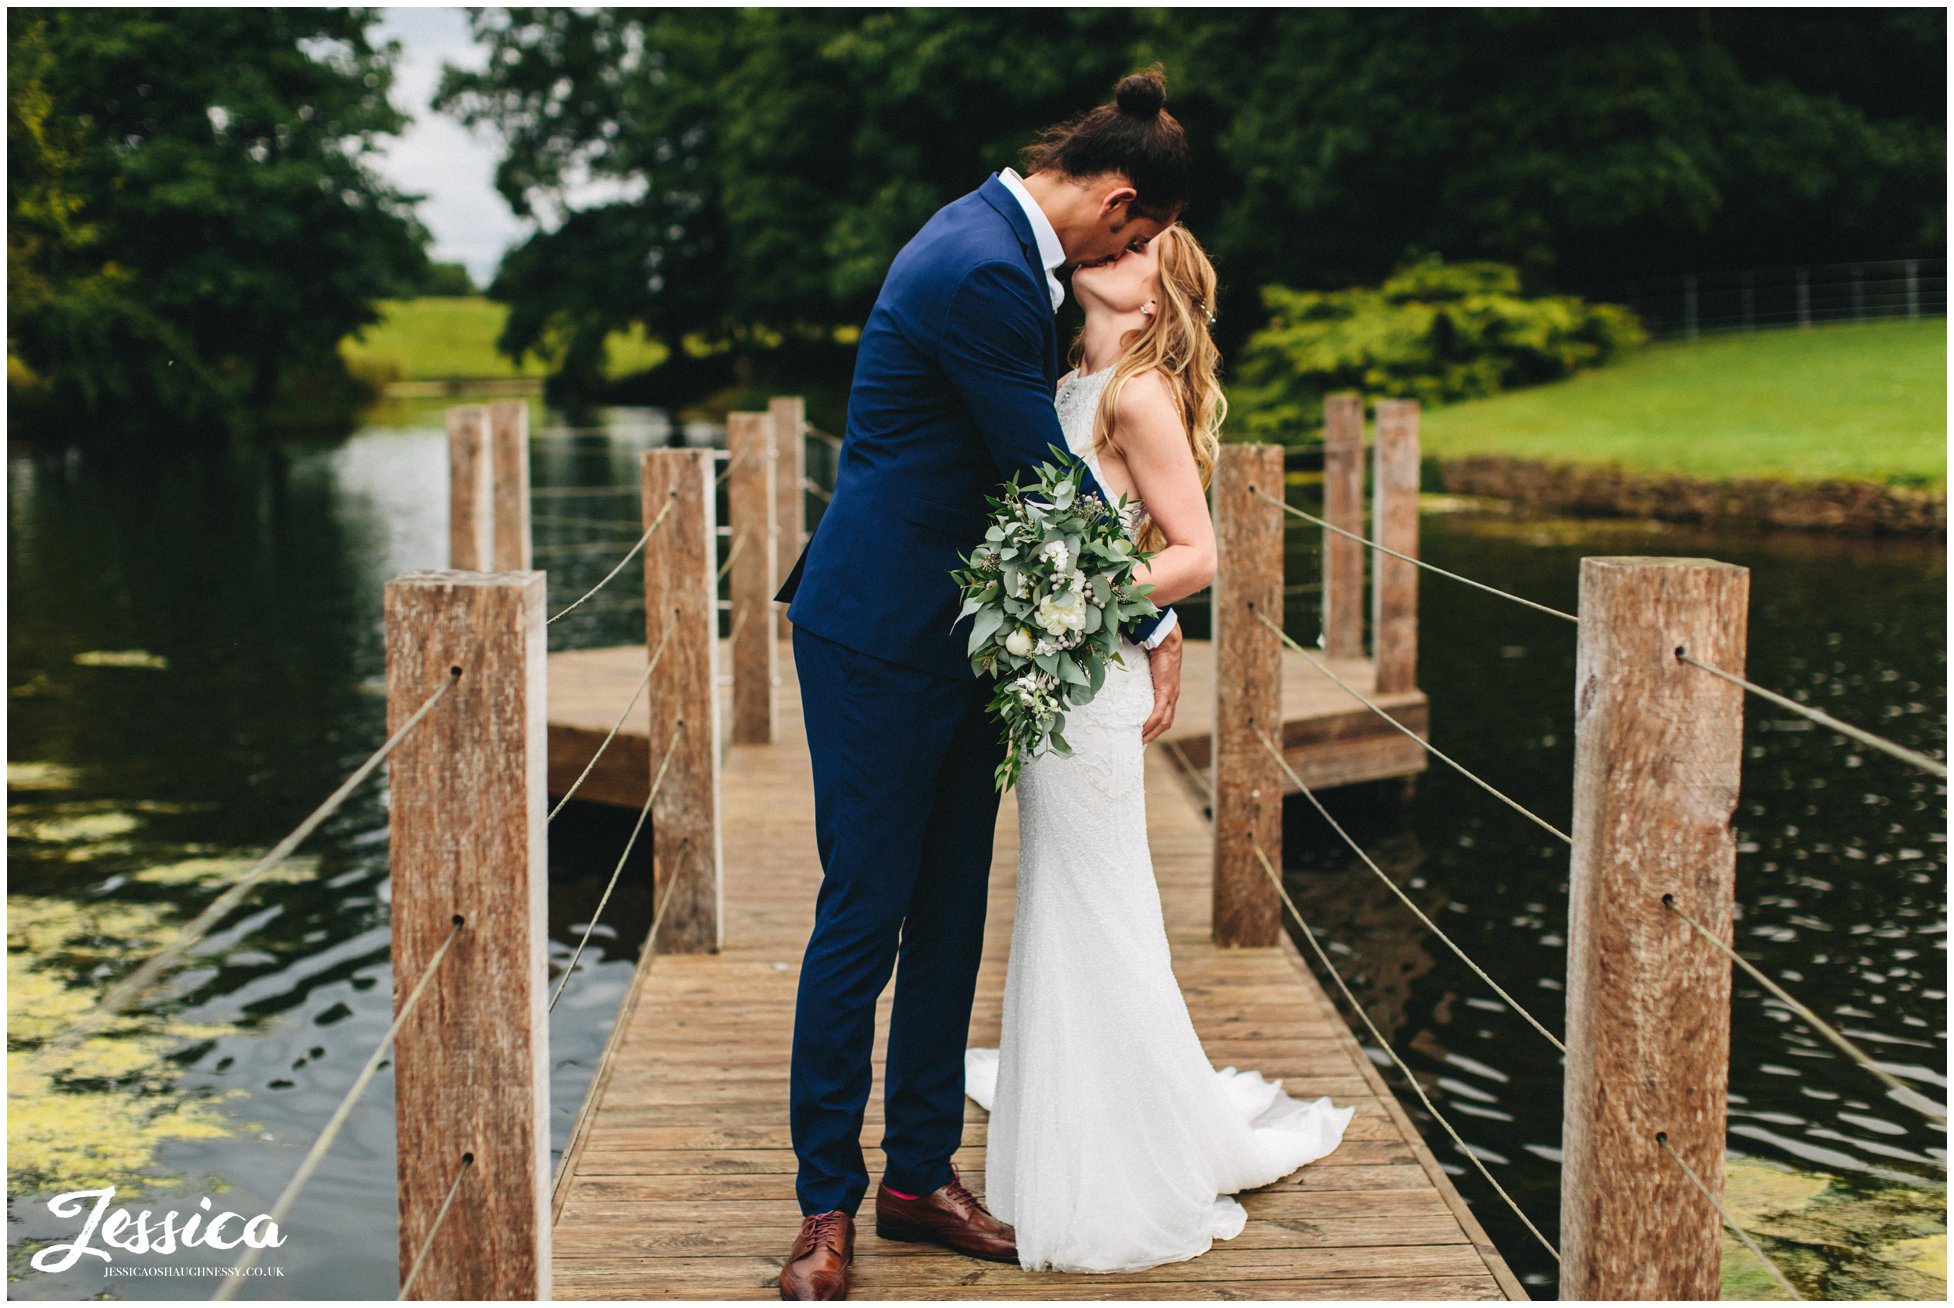 newly wed's kiss on the jetty at merrydale manor in cheshire